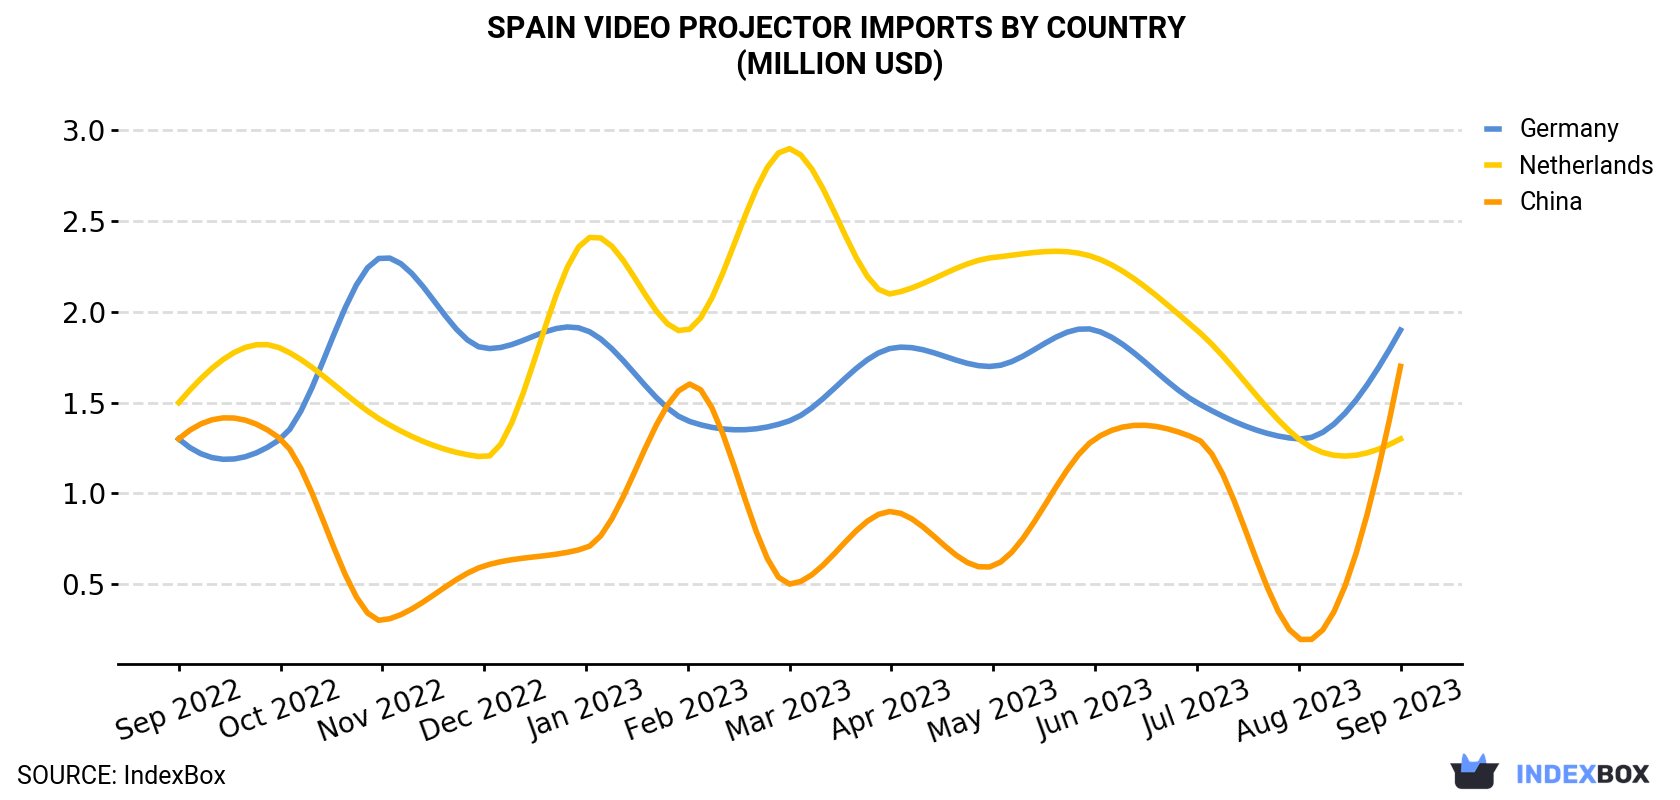 Spain Video Projector Imports By Country (Million USD)